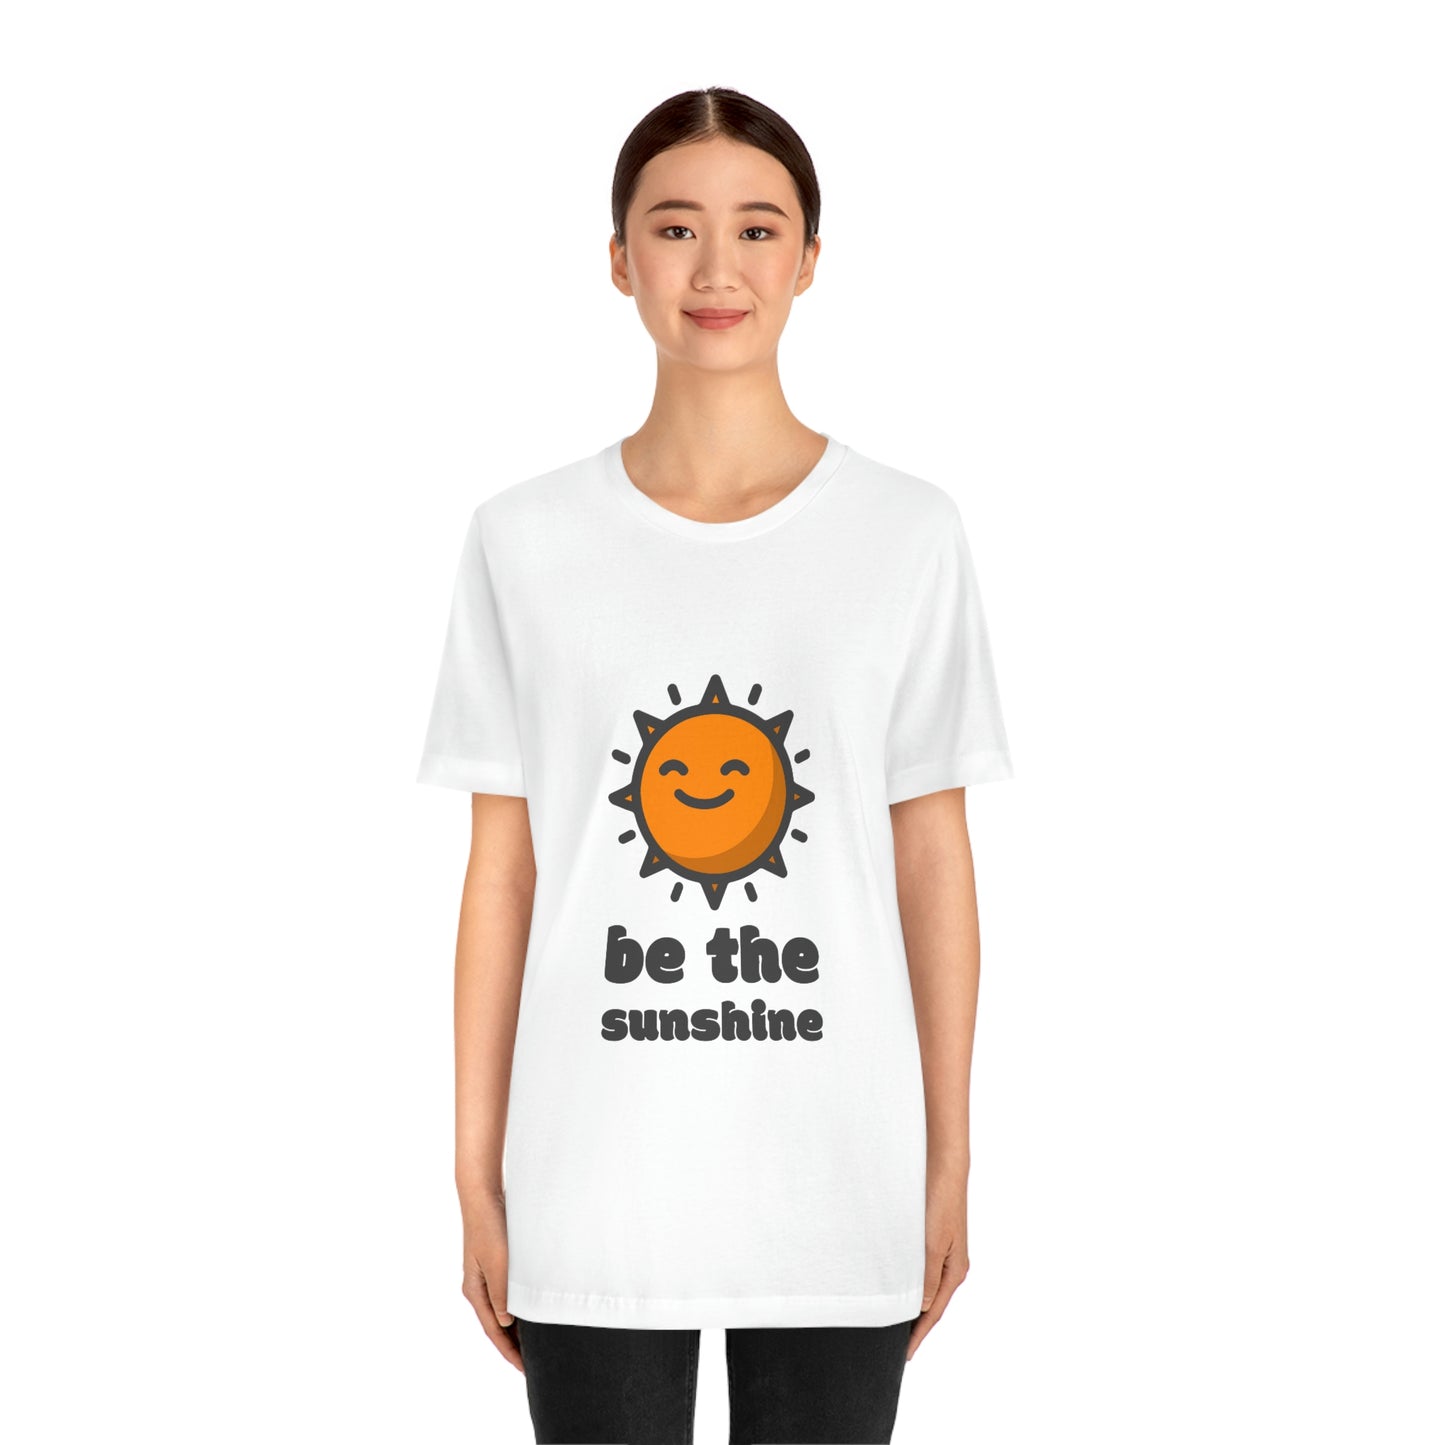 Be the sunshine (in someone's life)